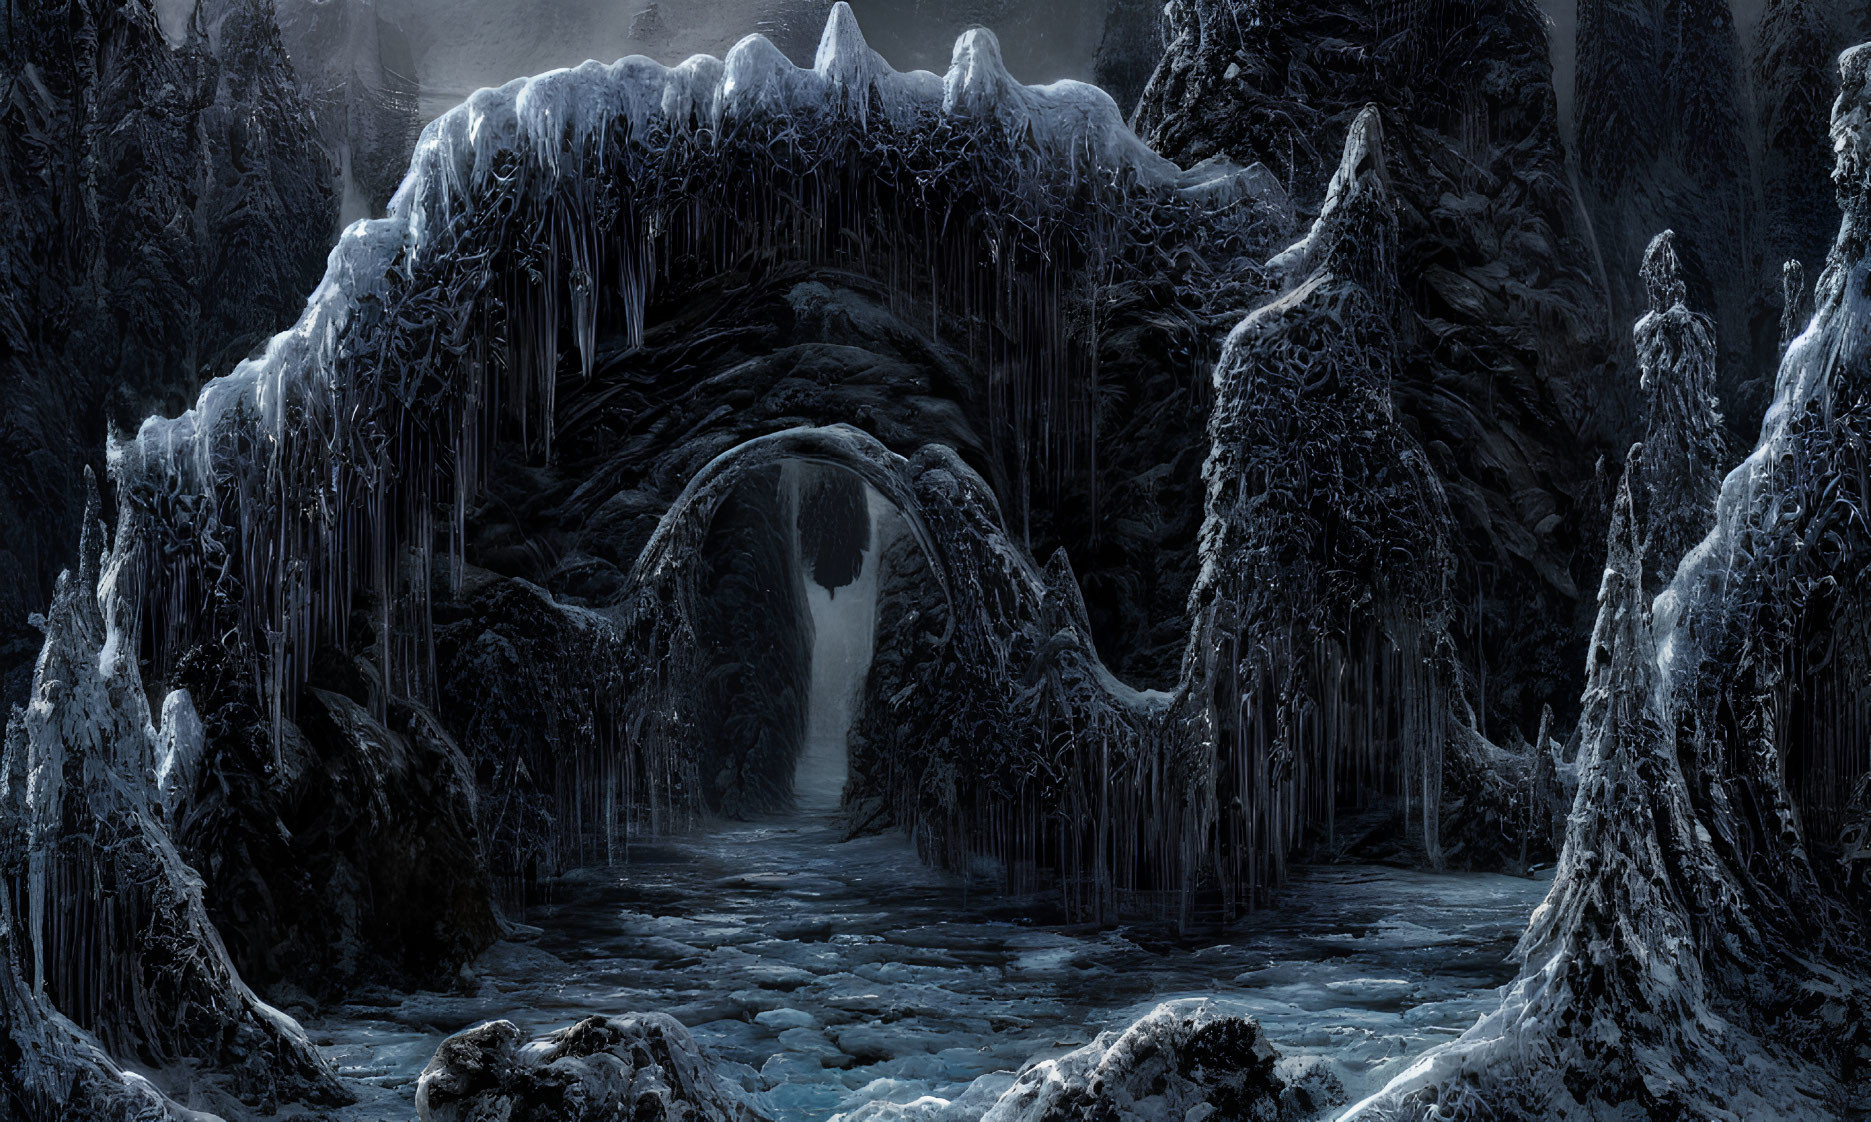 Frozen landscape with icicle archway over river and snow-covered trees